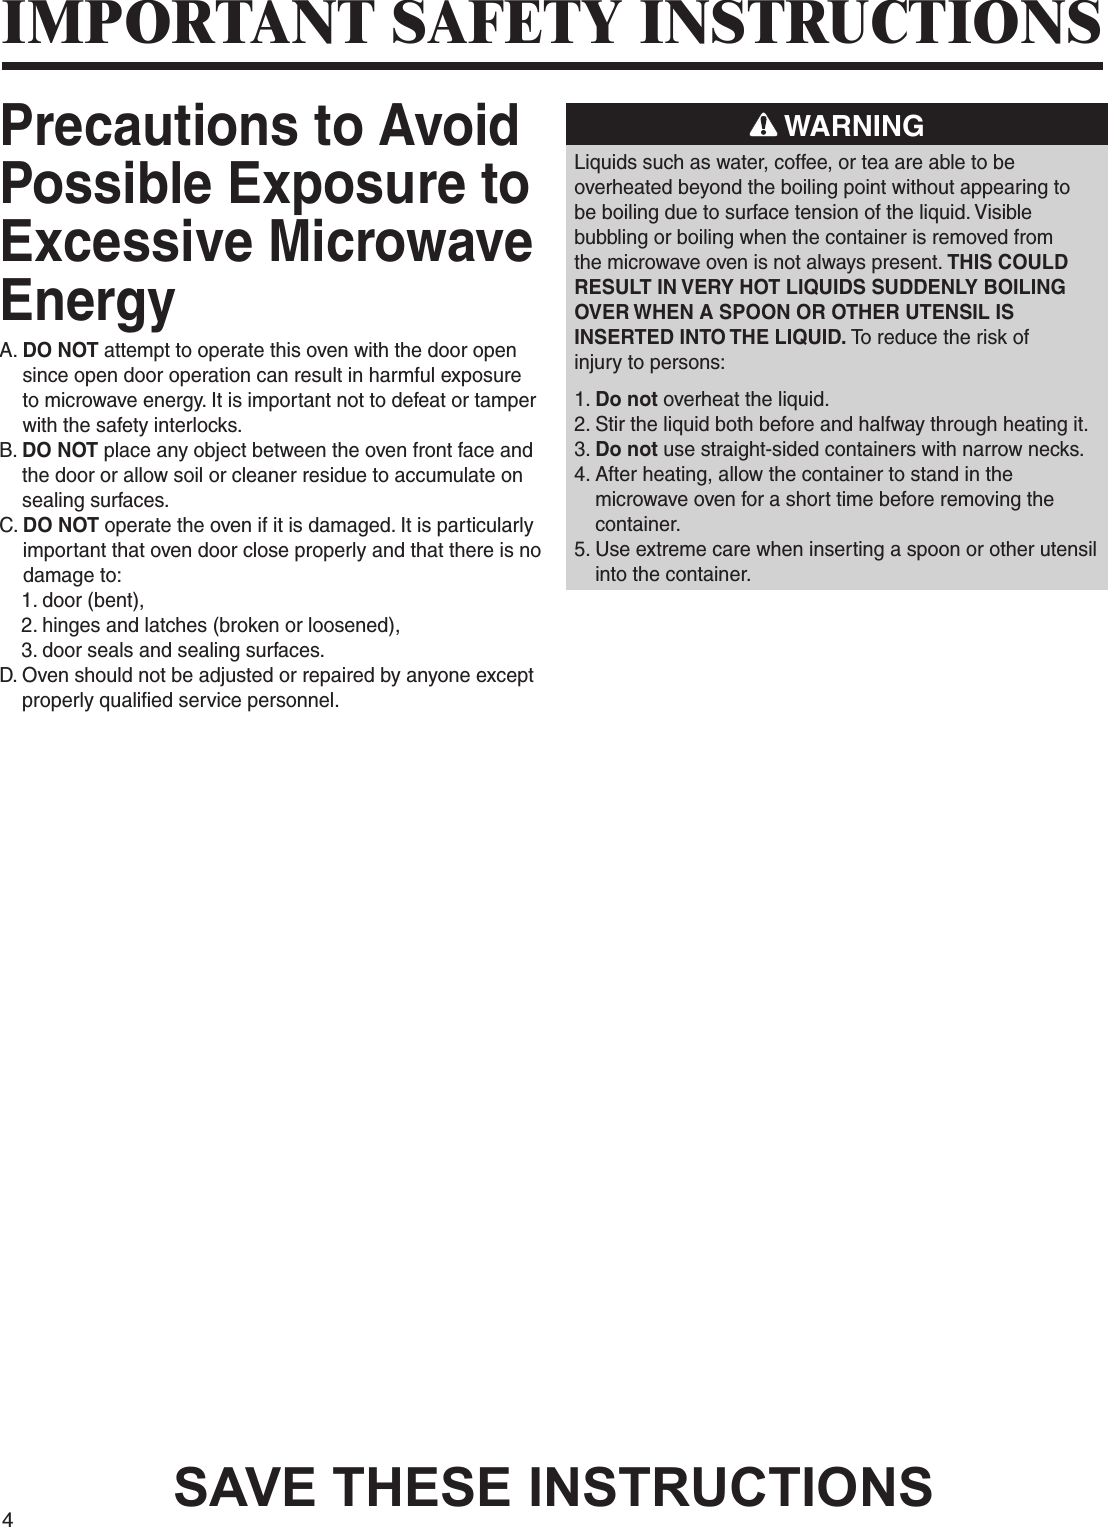 4SAVE THESE INSTRUCTIONSIMPORTANT SAFETY INSTRUCTIONSPrecautions to Avoid Possible Exposure to Excessive Microwave EnergyA.  DO NOT attempt to operate this oven with the door open since open door operation can result in harmful exposure to microwave energy. It is important not to defeat or tamper with the safety interlocks.B.  DO NOT place any object between the oven front face and the door or allow soil or cleaner residue to accumulate on sealing surfaces.C.  DO NOT operate the oven if it is damaged. It is particularly important that oven door close properly and that there is no damage to:    1. door (bent),    2. hinges and latches (broken or loosened),    3. door seals and sealing surfaces.D.  Oven should not be adjusted or repaired by anyone except properly qualified service personnel. WARNINGLiquids such as water, coffee, or tea are able to beoverheated beyond the boiling point without appearing tobe boiling due to surface tension of the liquid. Visiblebubbling or boiling when the container is removed fromthe microwave oven is not always present. THIS COULDRESULT IN VERY HOT LIQUIDS SUDDENLY BOILINGOVER WHEN A SPOON OR OTHER UTENSIL ISINSERTED INTO THE LIQUID. To reduce the risk ofinjury to persons:1. Do not overheat the liquid.2.  Stir the liquid both before and halfway through heating it.3.  Do not use straight-sided containers with narrow necks.4.  After heating, allow the container to stand in the microwave oven for a short time before removing the container.5.  Use extreme care when inserting a spoon or other utensil into the container.